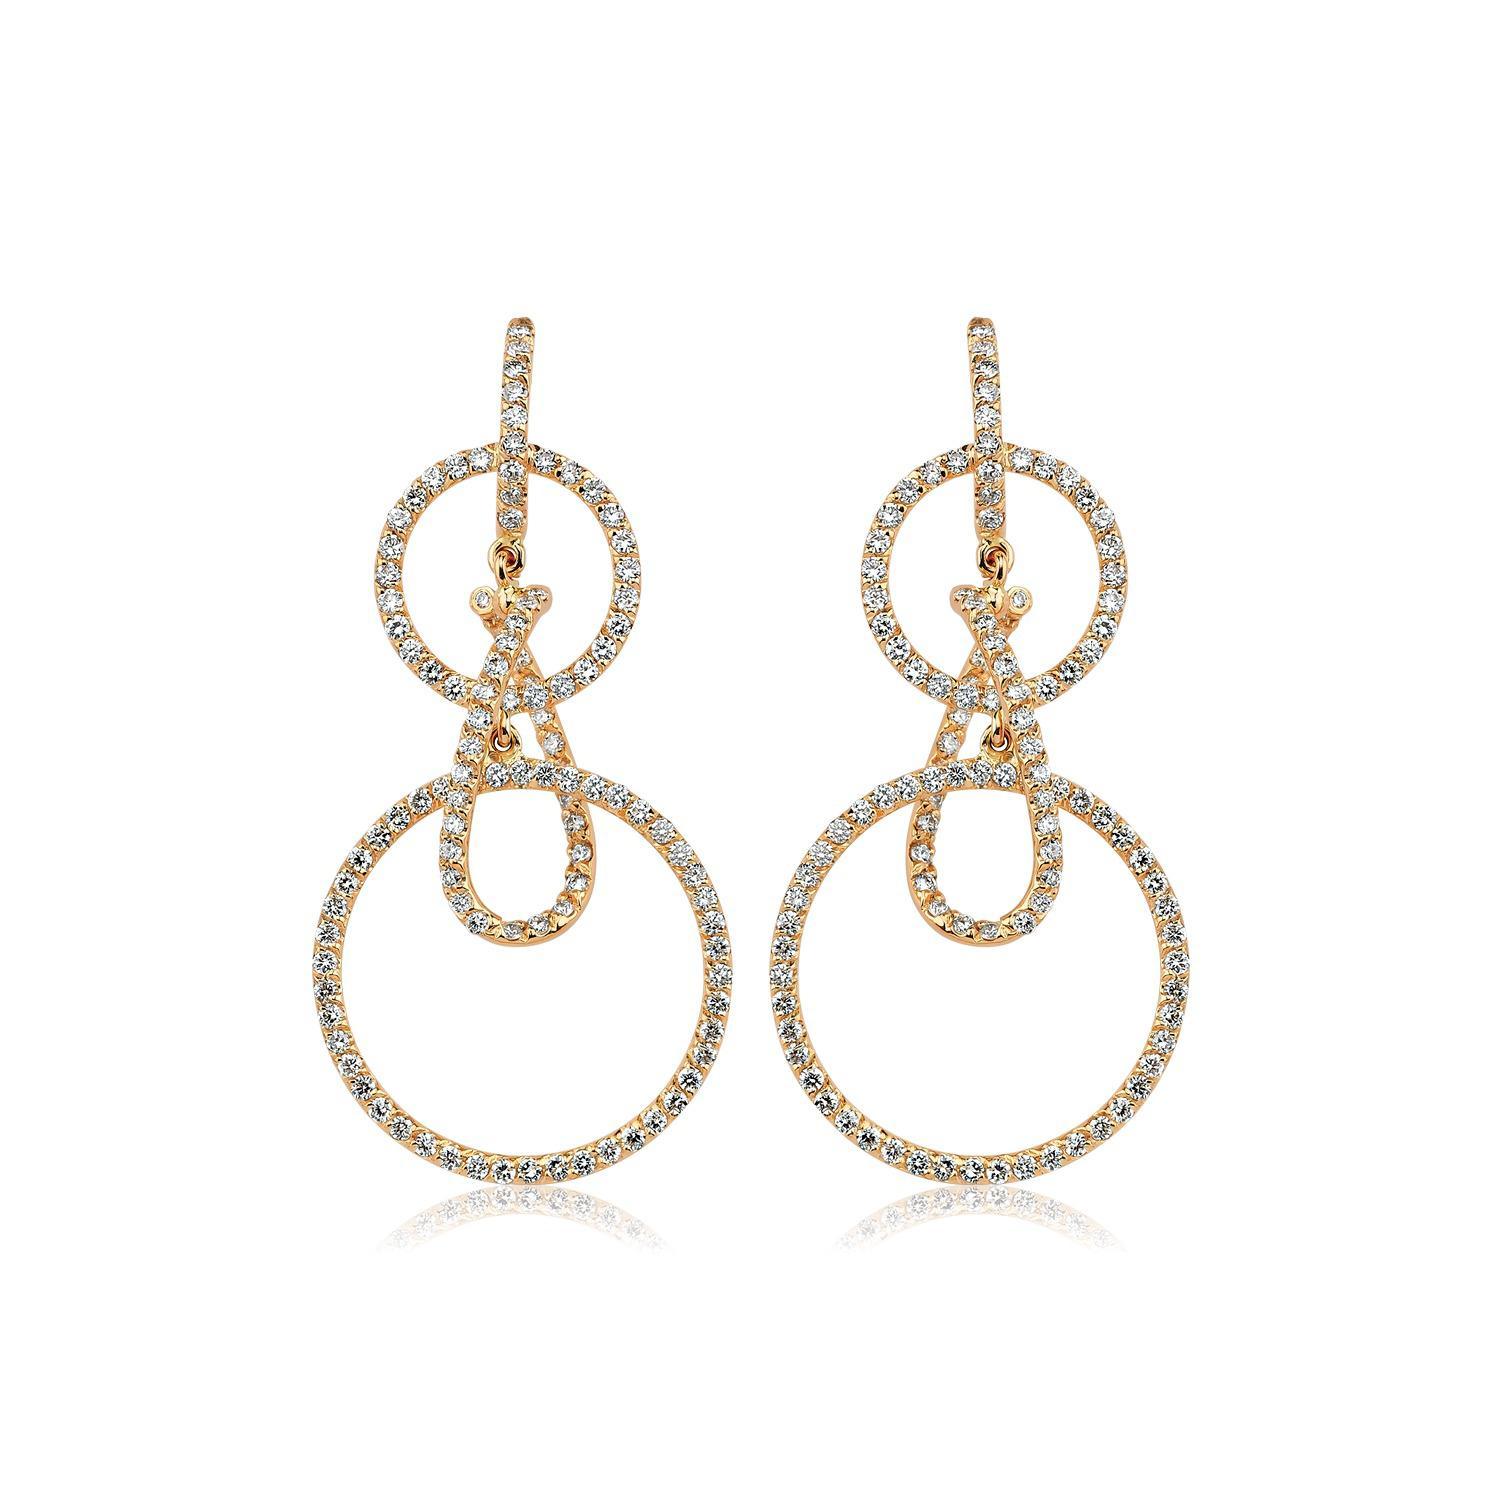 Necklace:
Pendant 4.73 g 18K Gold
Chain 0.88 g 14K Gold
1.24ct Diamonds

Earrings:
9,1 g 18 K Gold
 2.42ct Diamonds